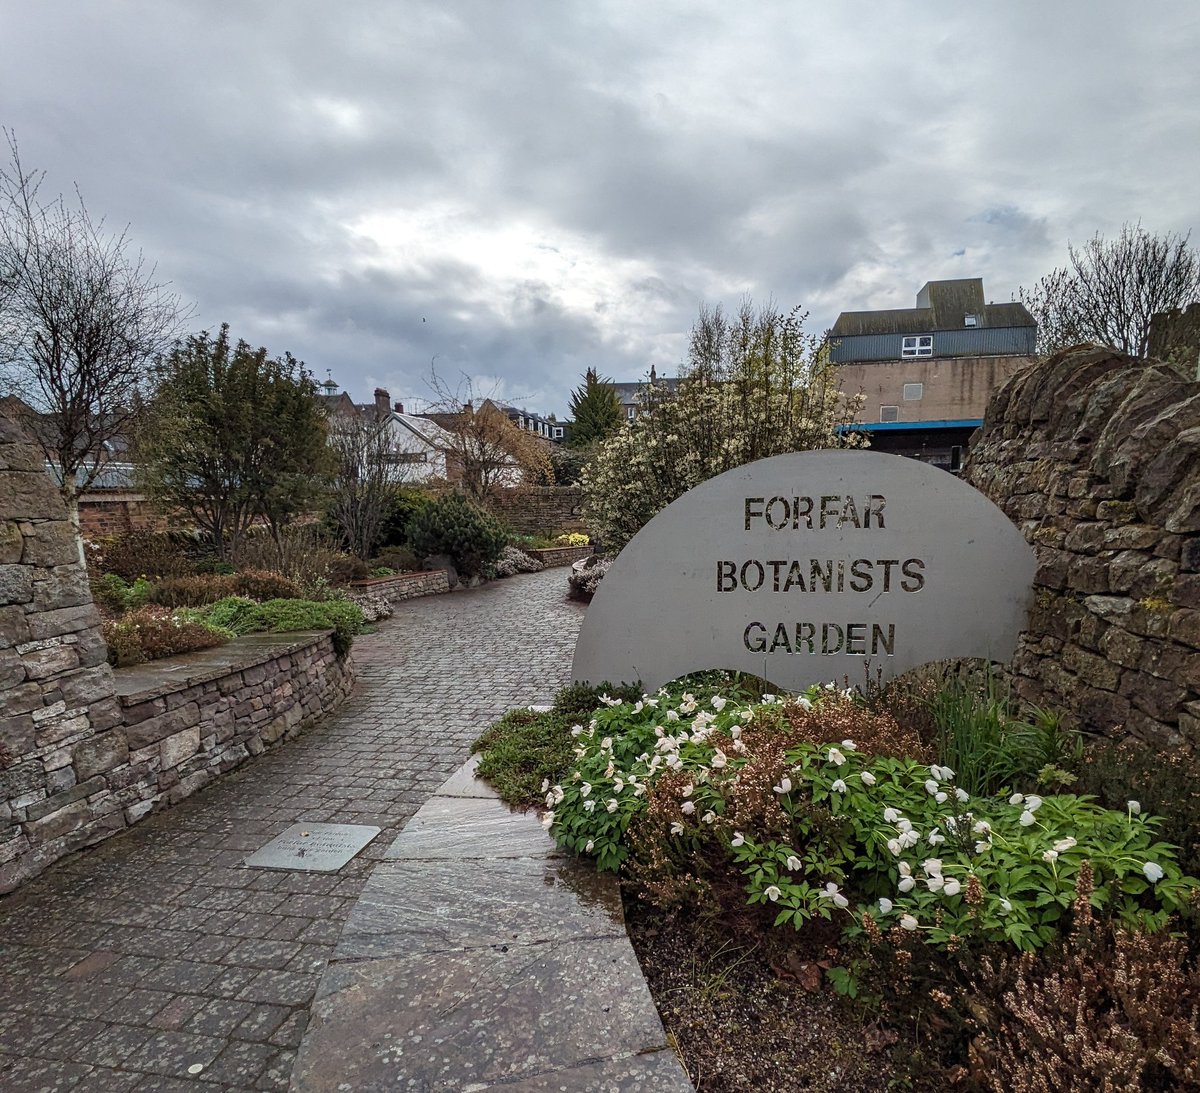 Always nice to visit the Forfar Botanists Garden to see how it's maturing since I designed it back in 2013. 
#scottishgardens #gardendesigner #gardendesign #forfar #angus